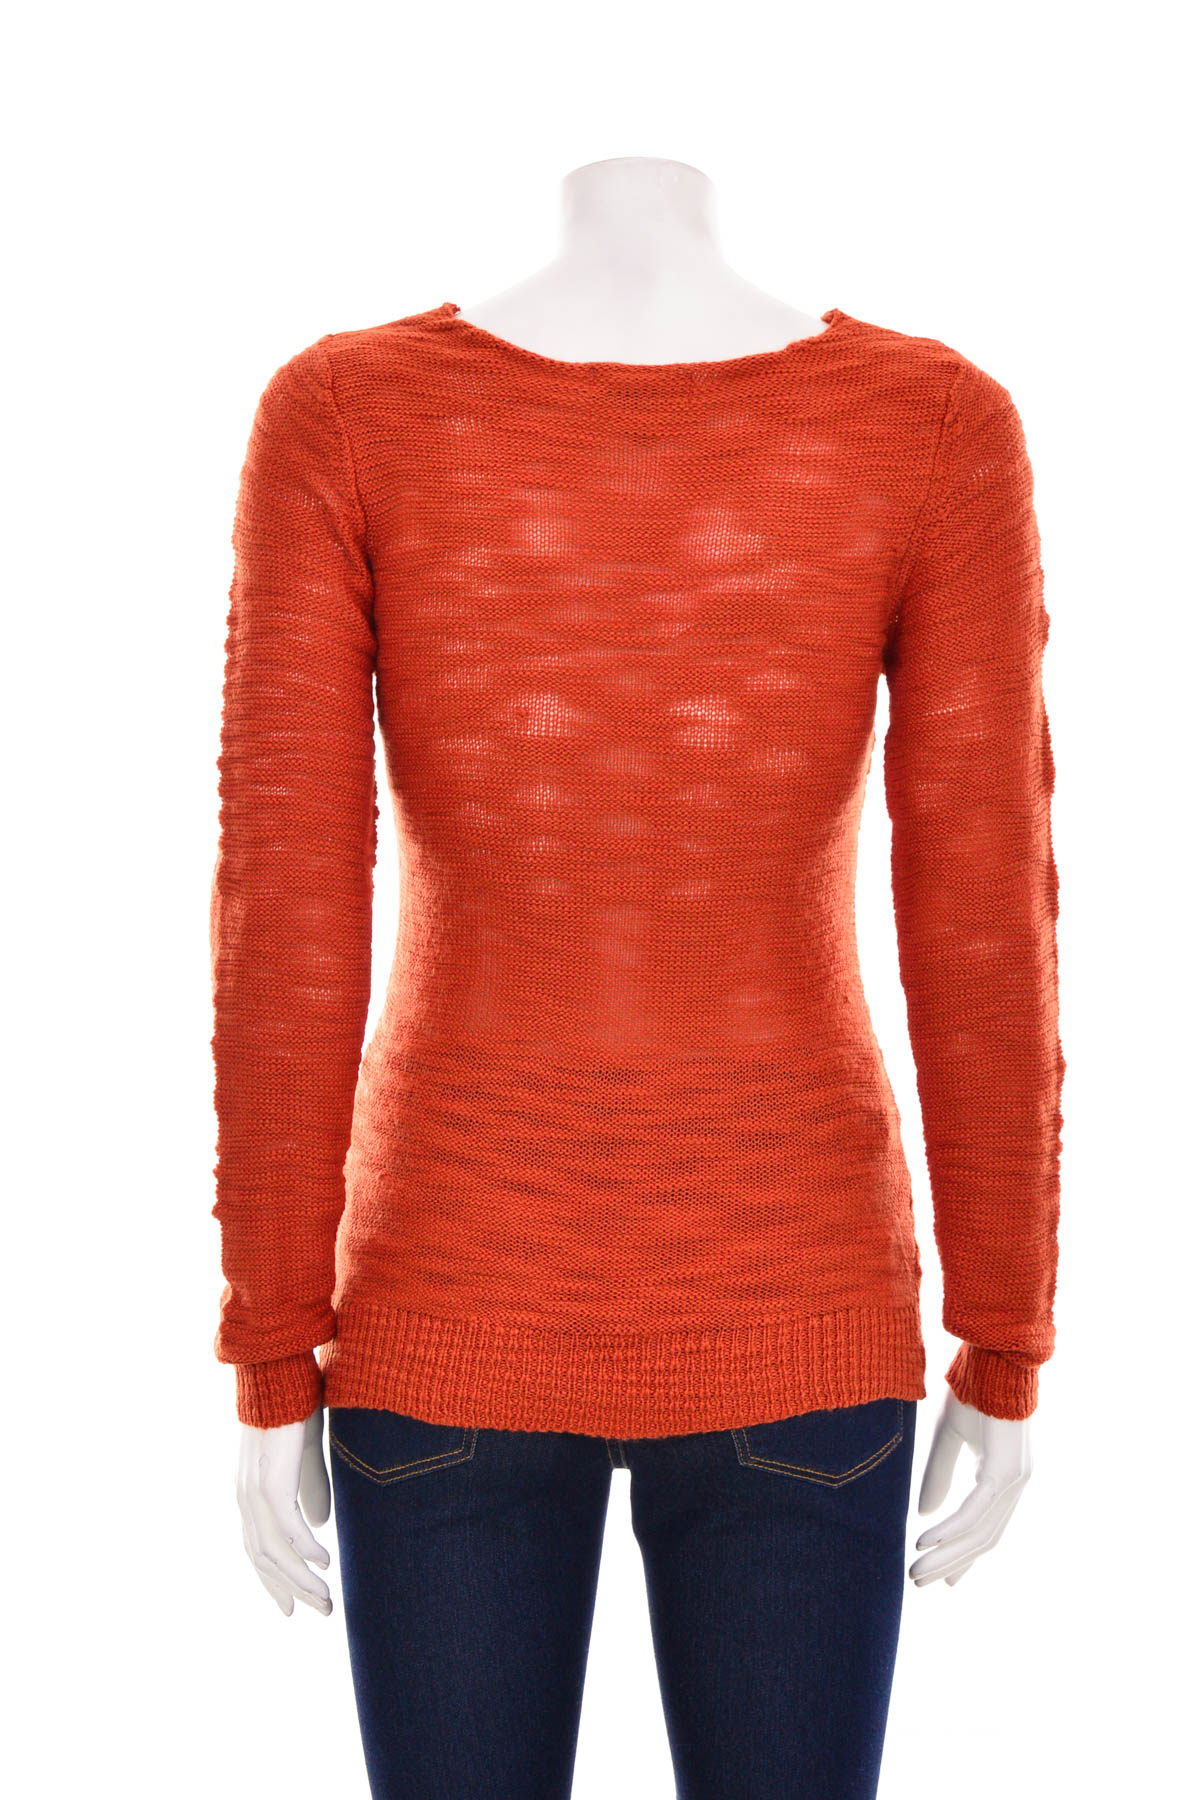 Women's sweater - Attention - 1